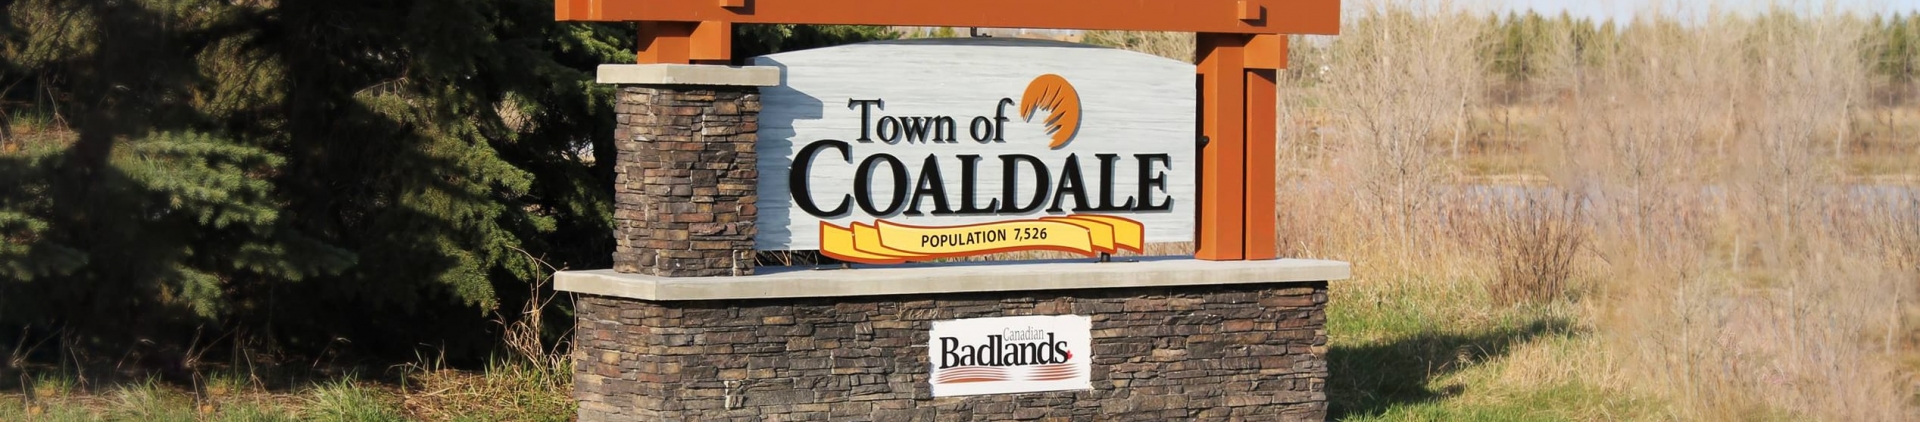 Town of Coaldale sign.